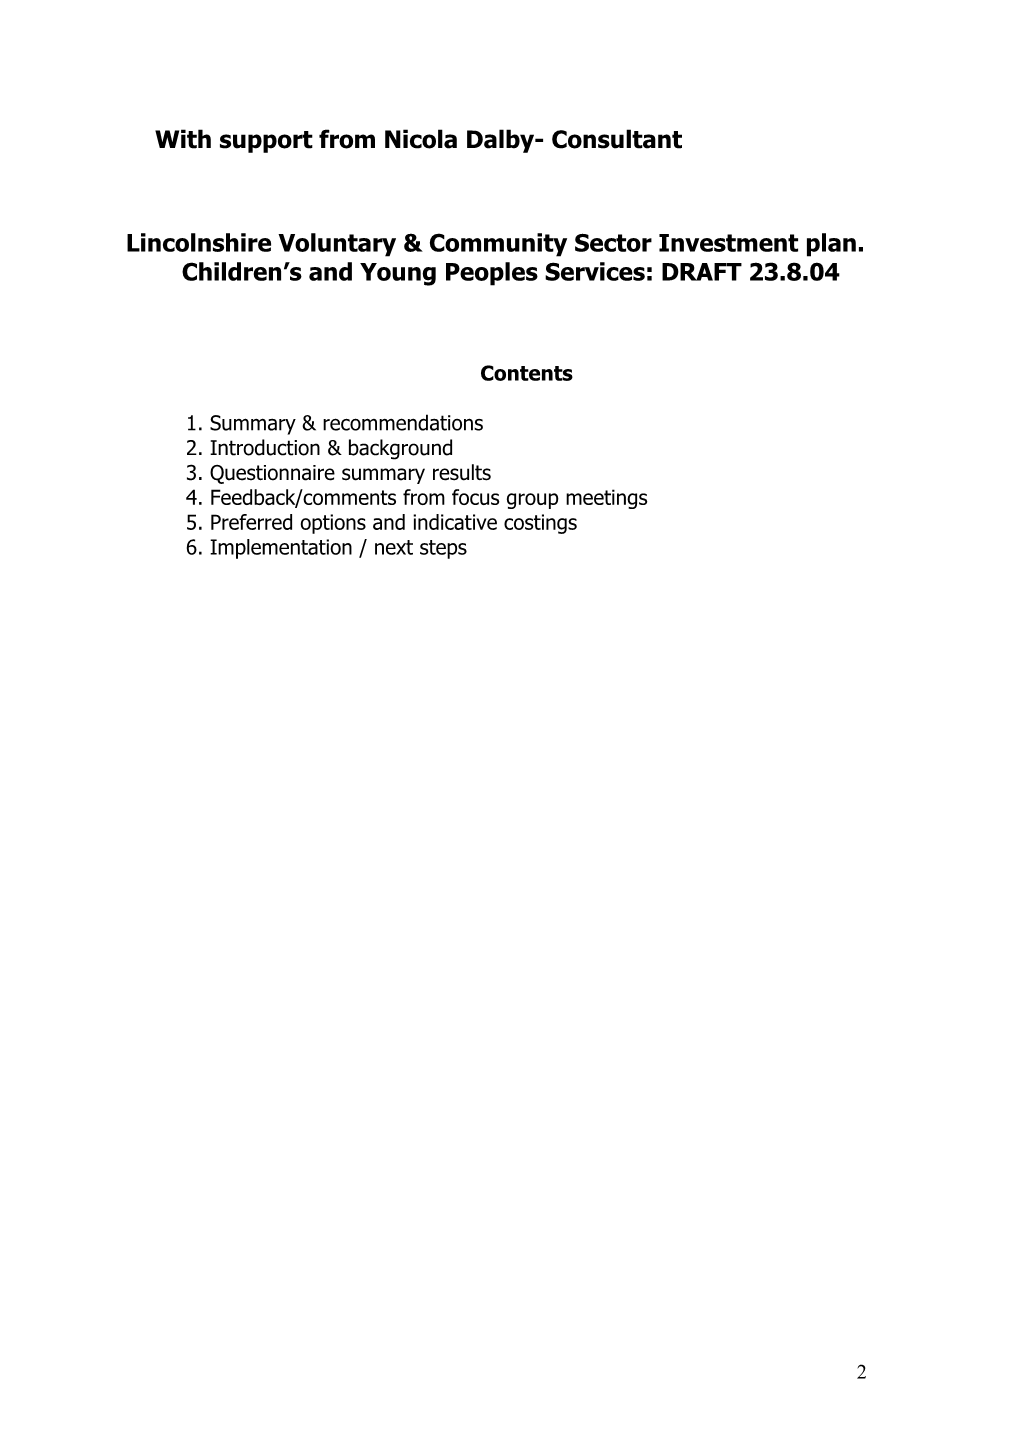 Lincolnshire Voluntary & Community Sector Investment Plan